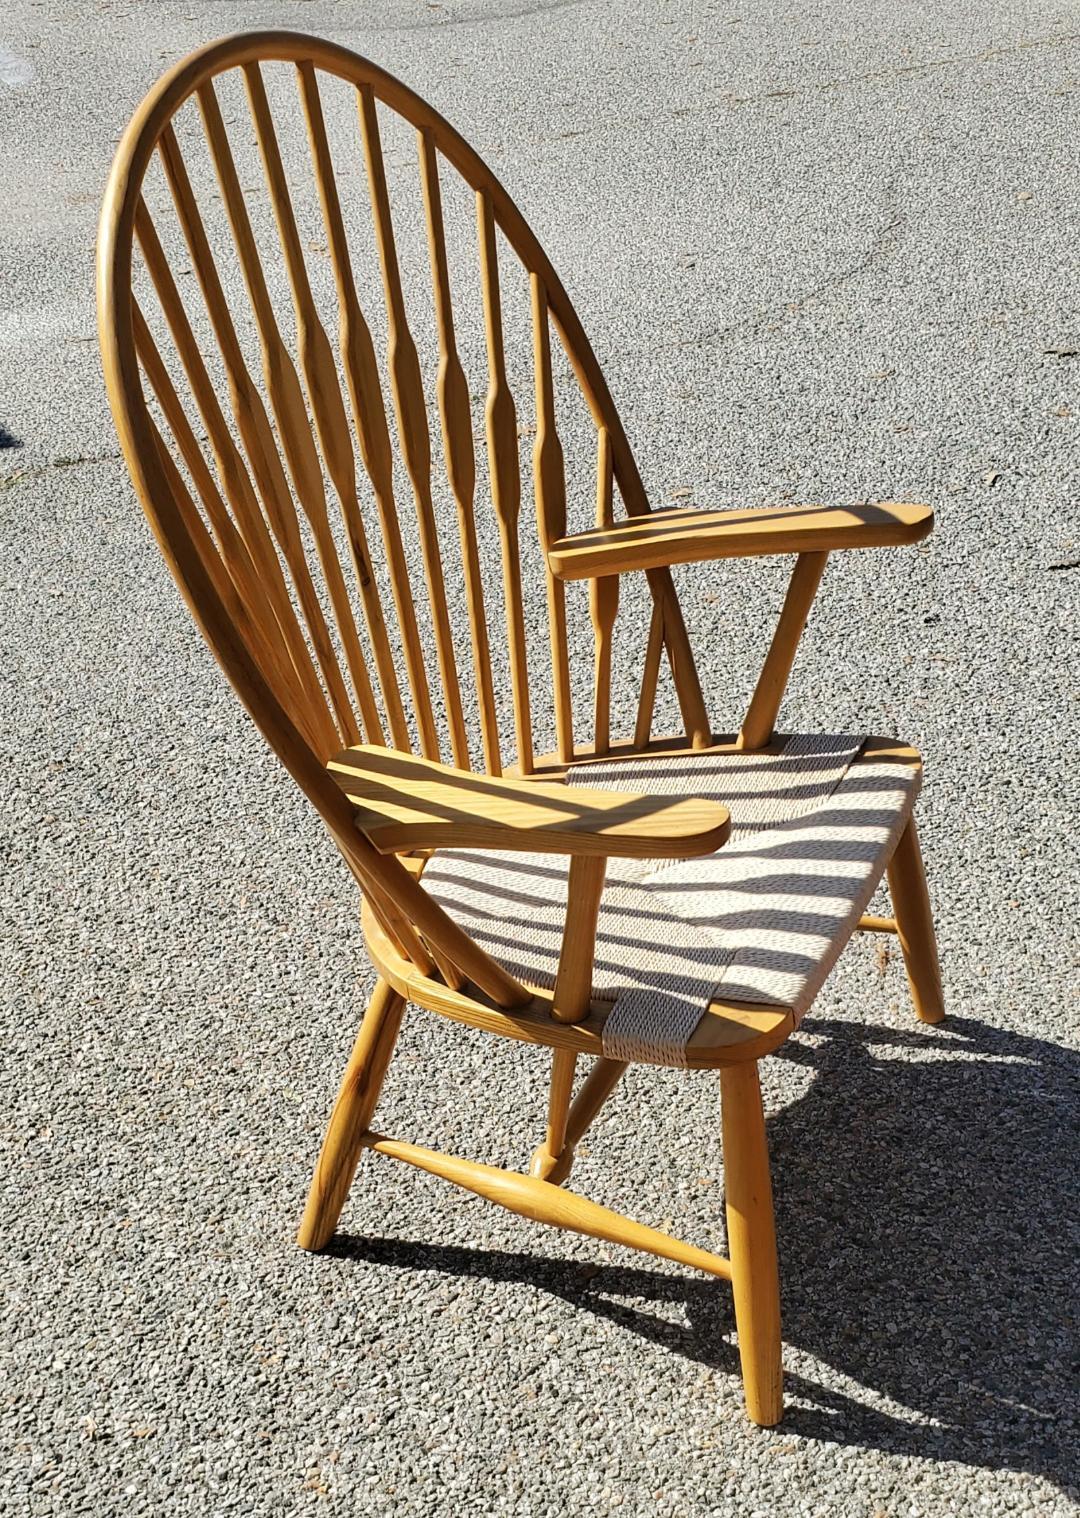 Vintage PEACOCK CHAIR Oak Wood With Cord Seating Mid Century Modern  In Good Condition For Sale In Monrovia, CA